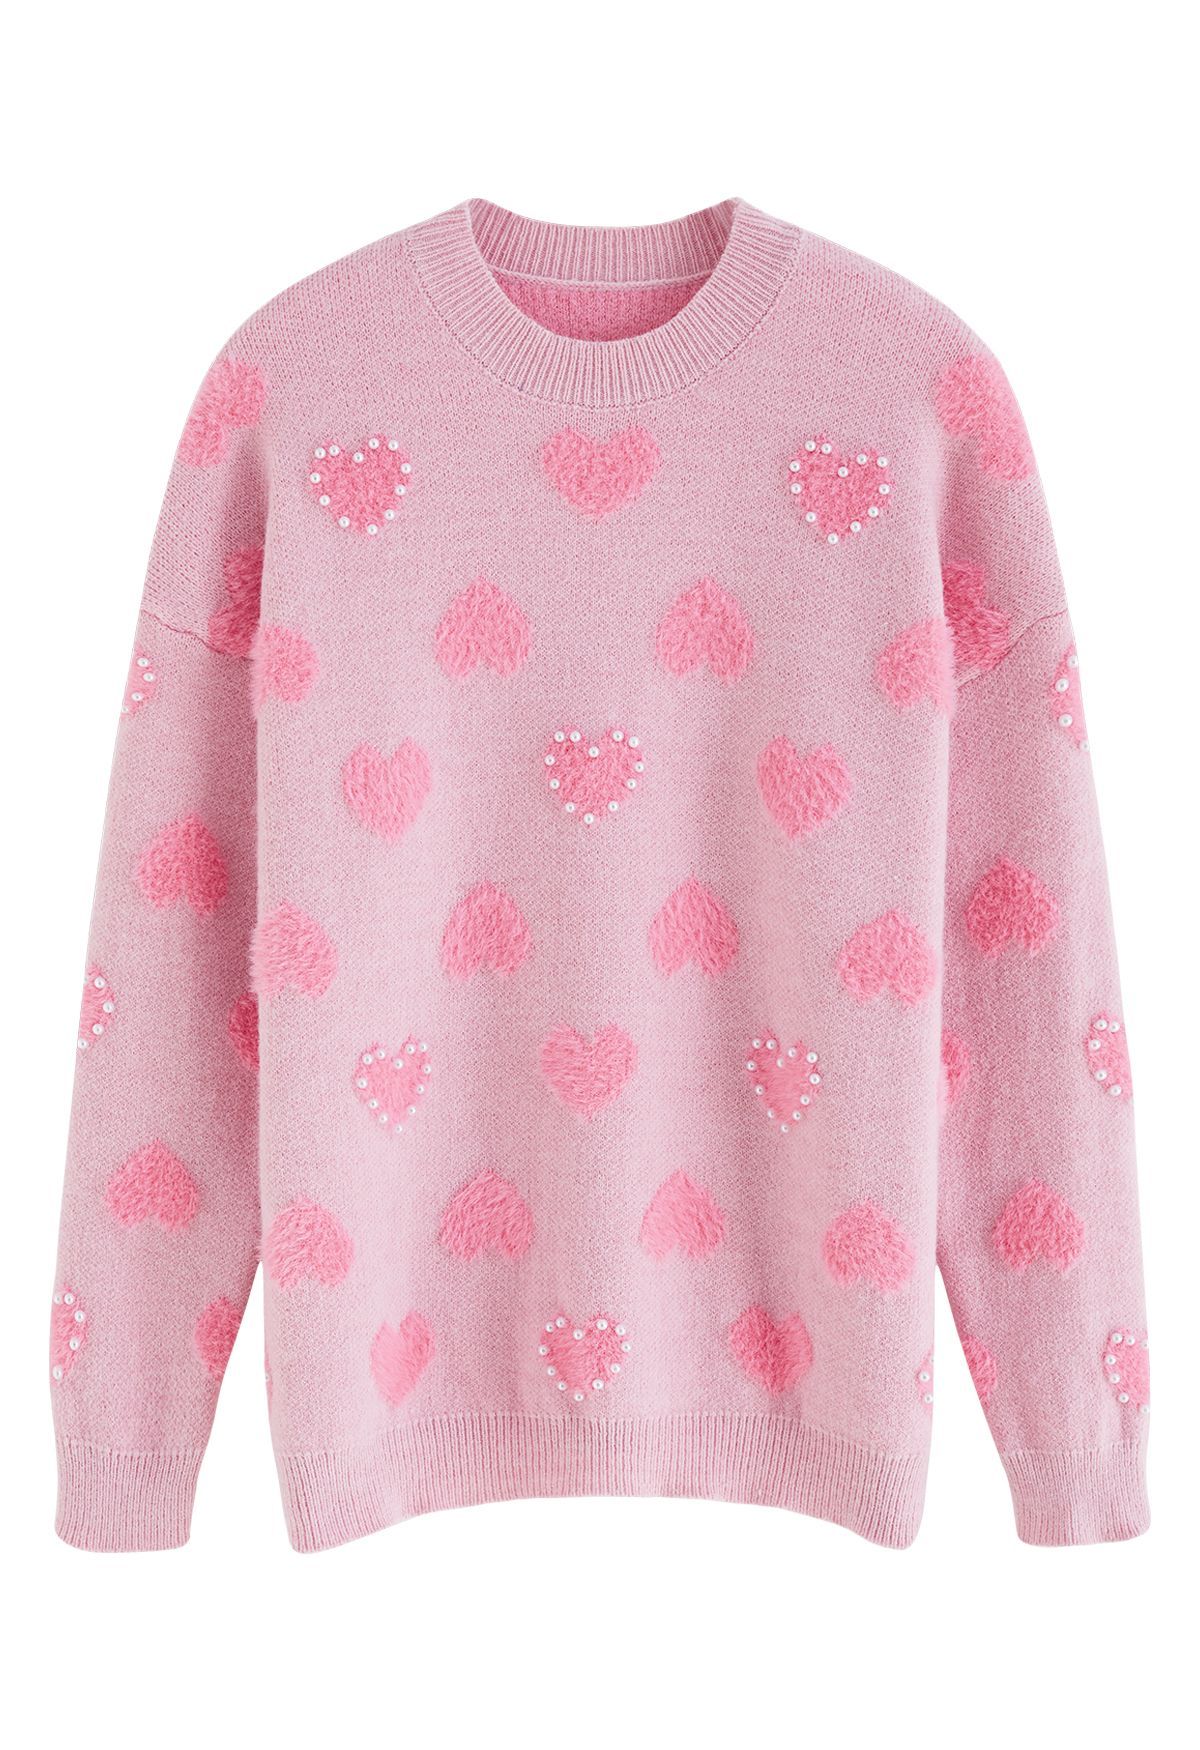 Pearl Trim Fluffy Heart Knit Sweater in Pink | Chicwish